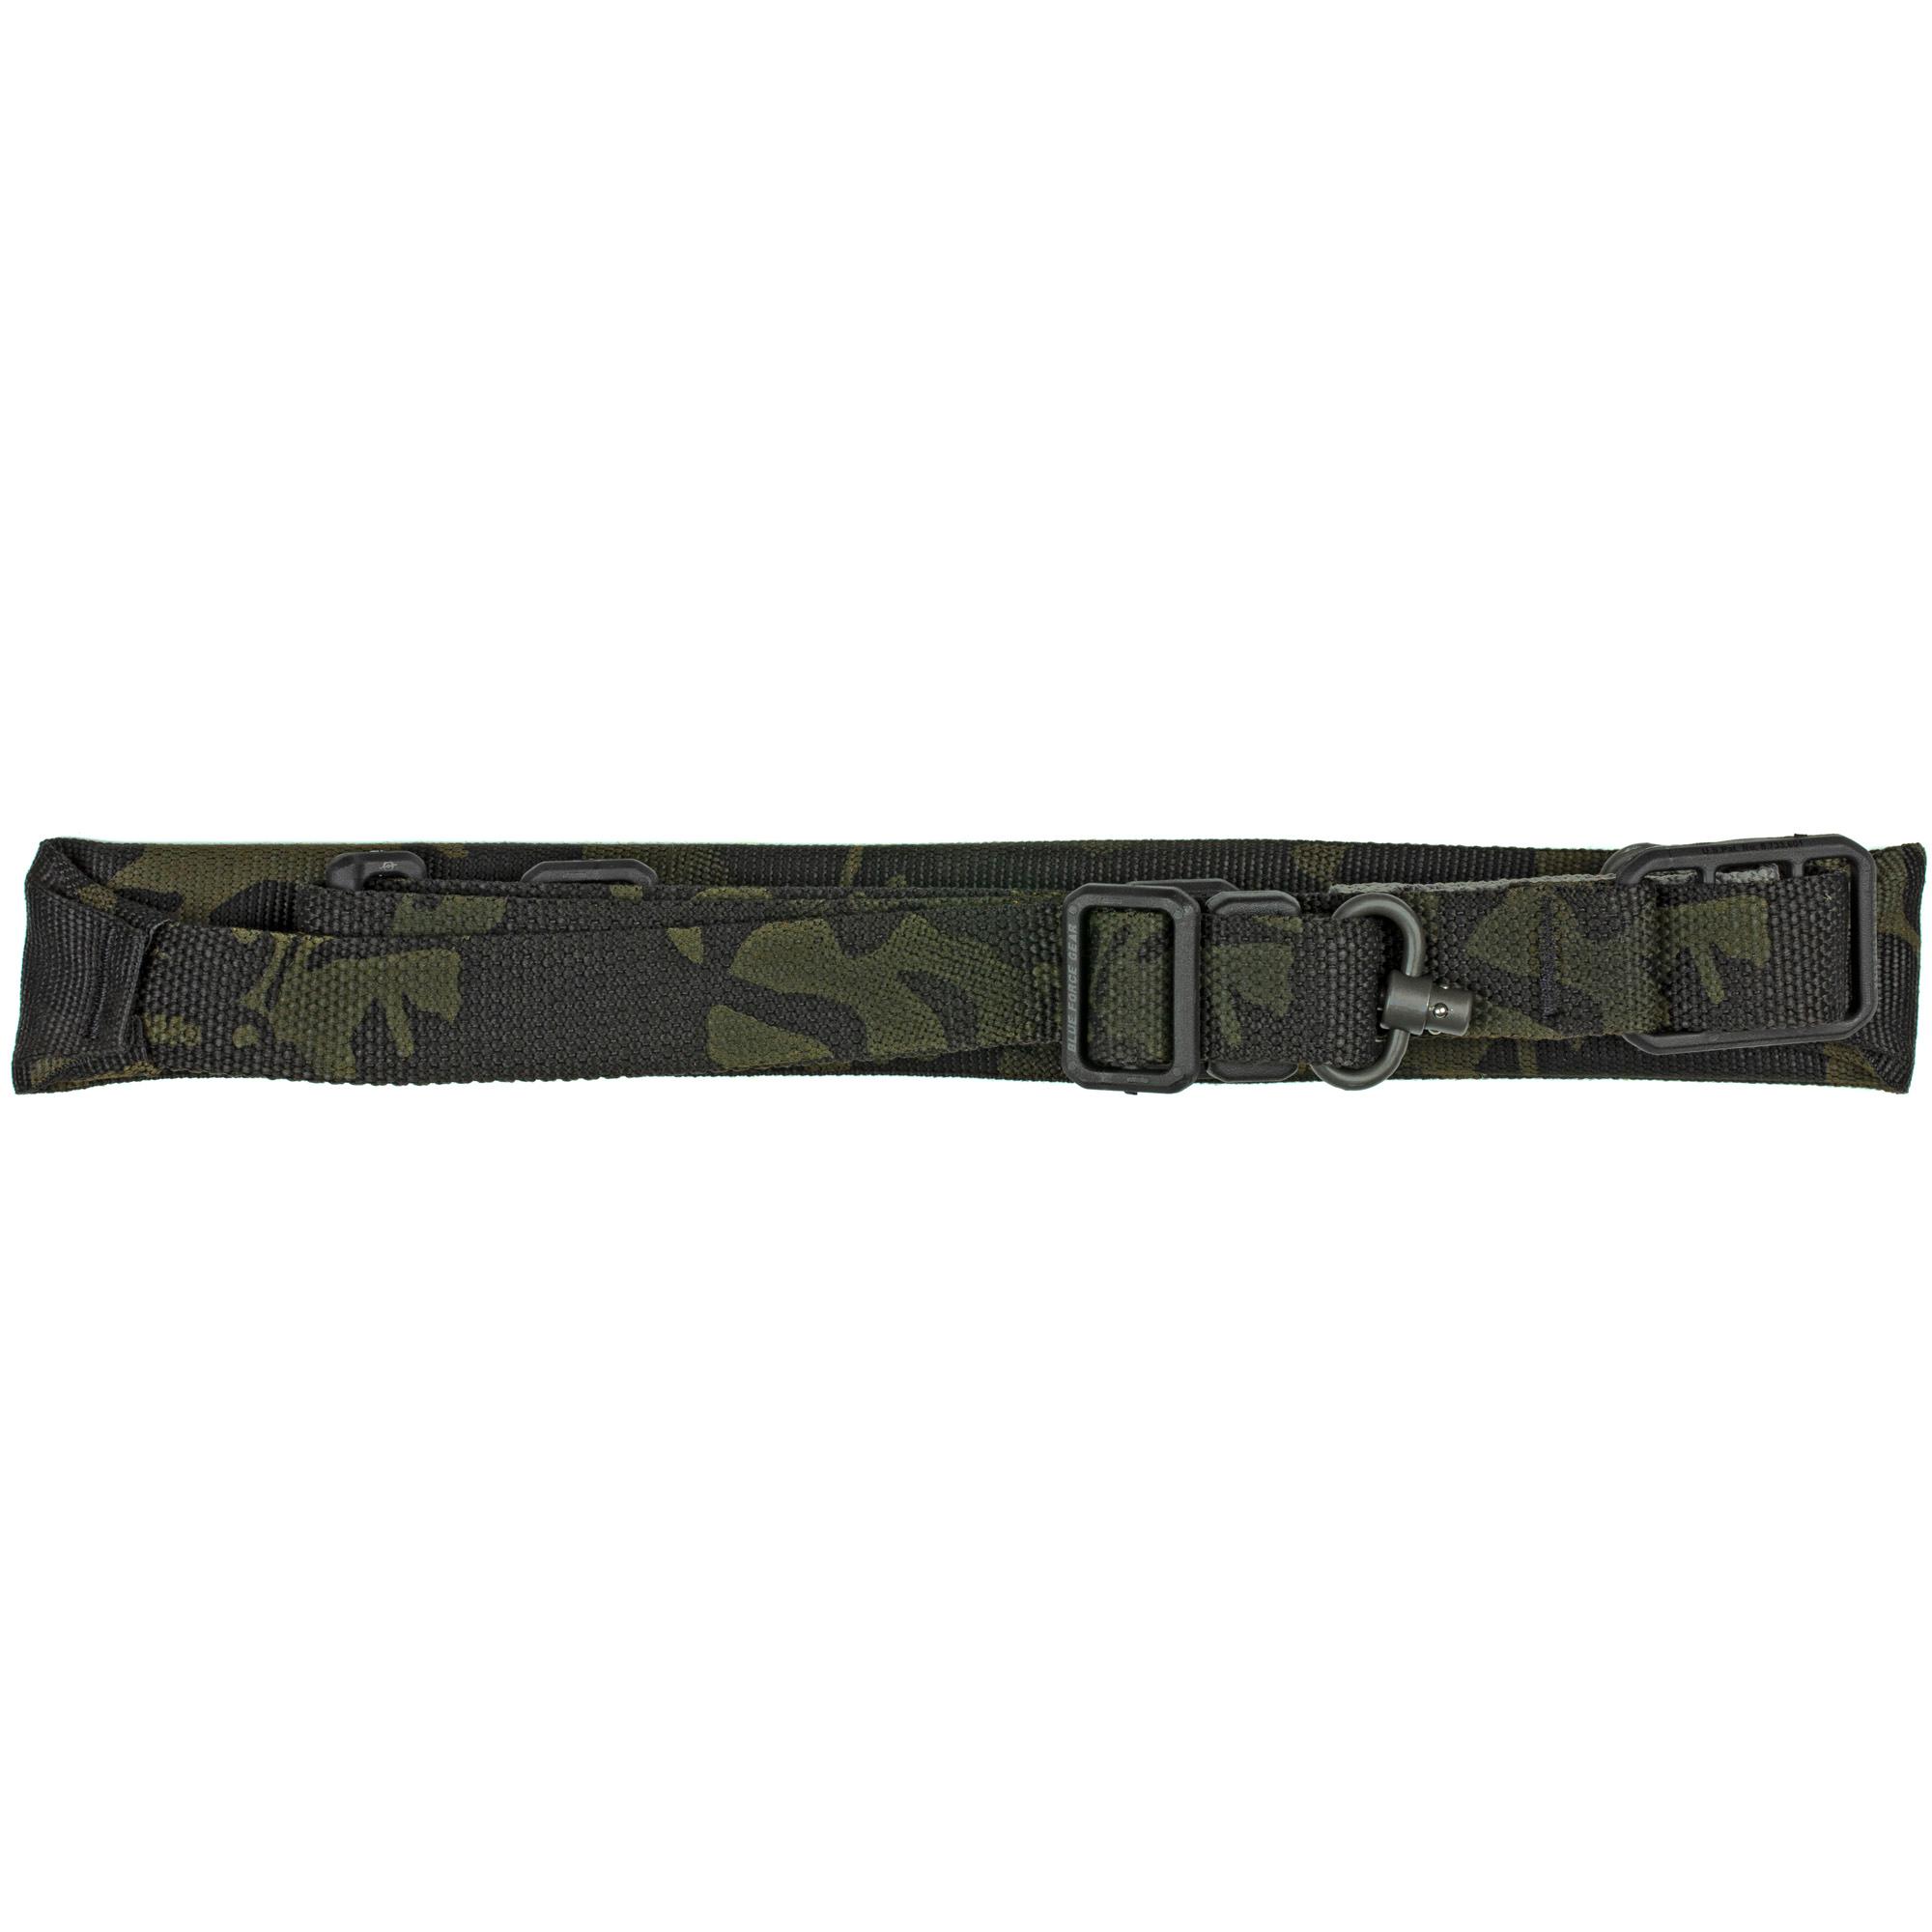 Gun Cleaning BL FORCE VICKERS PADDED 2-1 SLNG MCB image 1